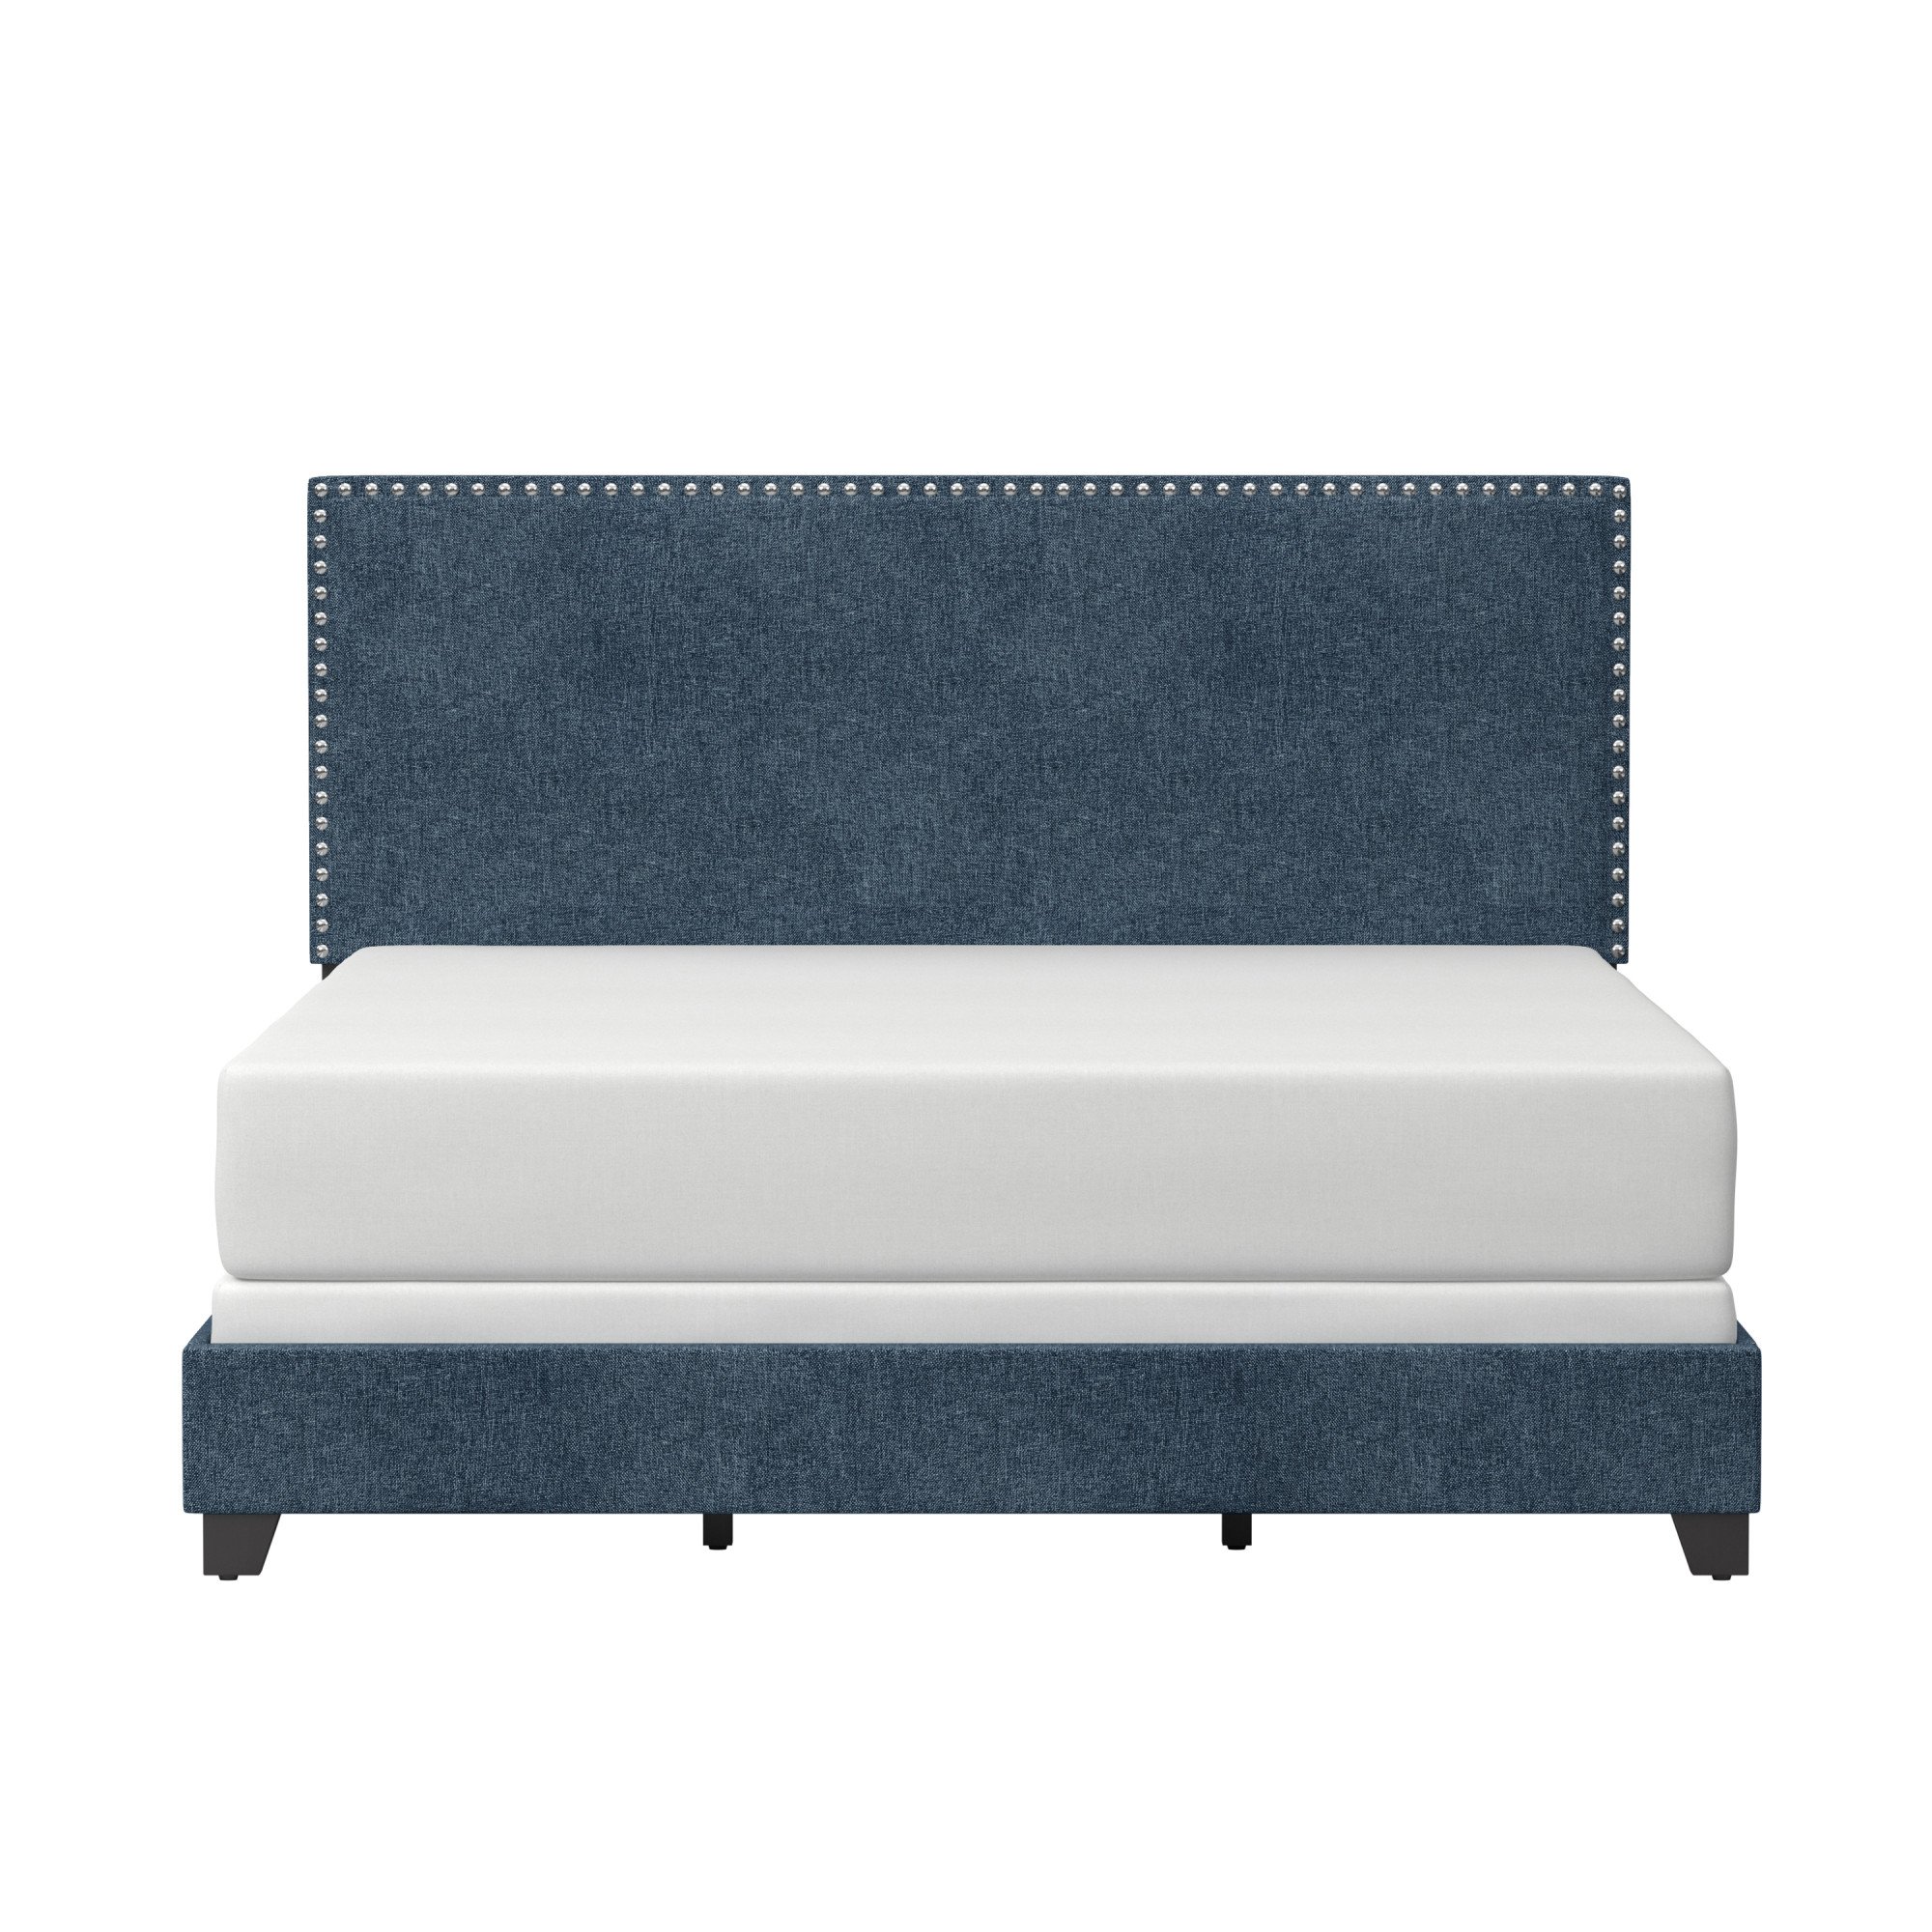 Willow Nailhead Trim Upholstered Queen Bed, Denim Fabric - image 2 of 17